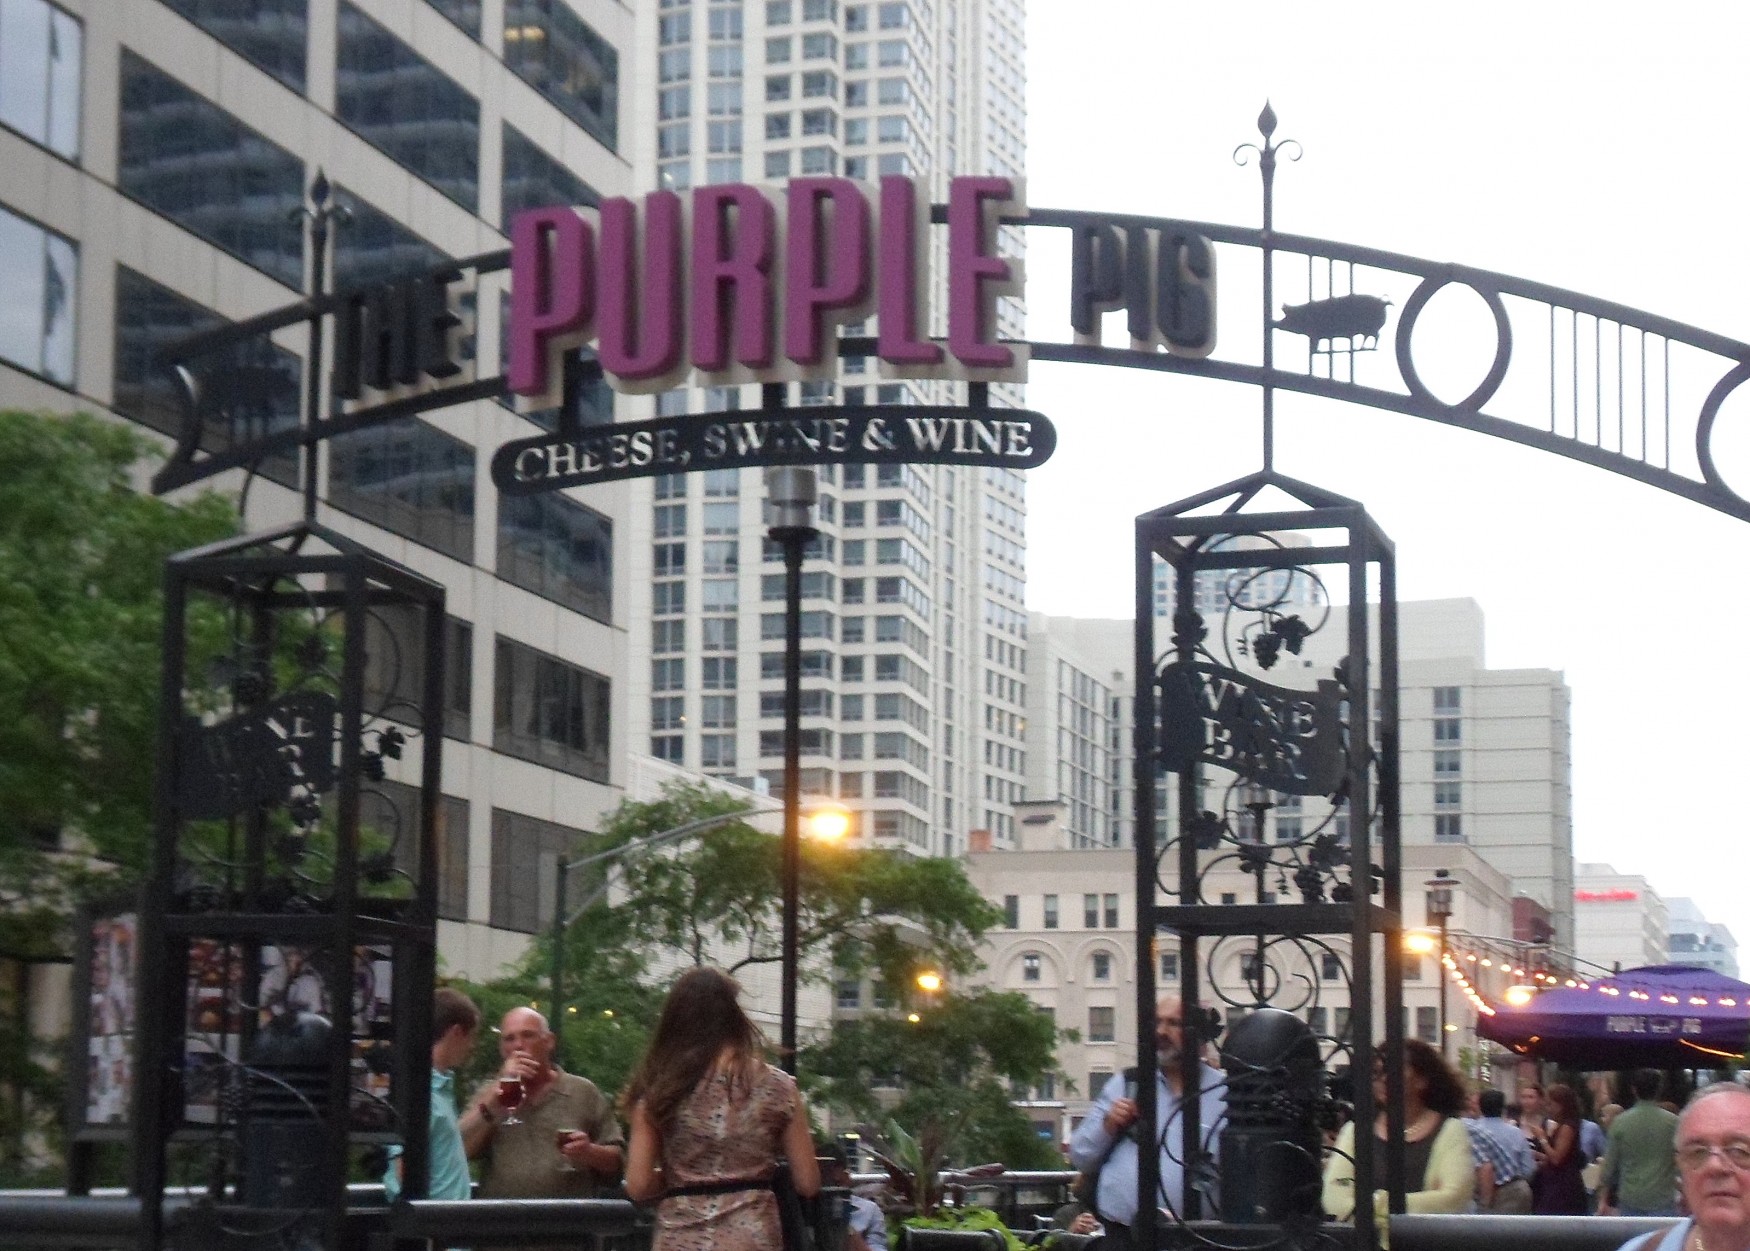 The Purple Pig: Dining in Chicago